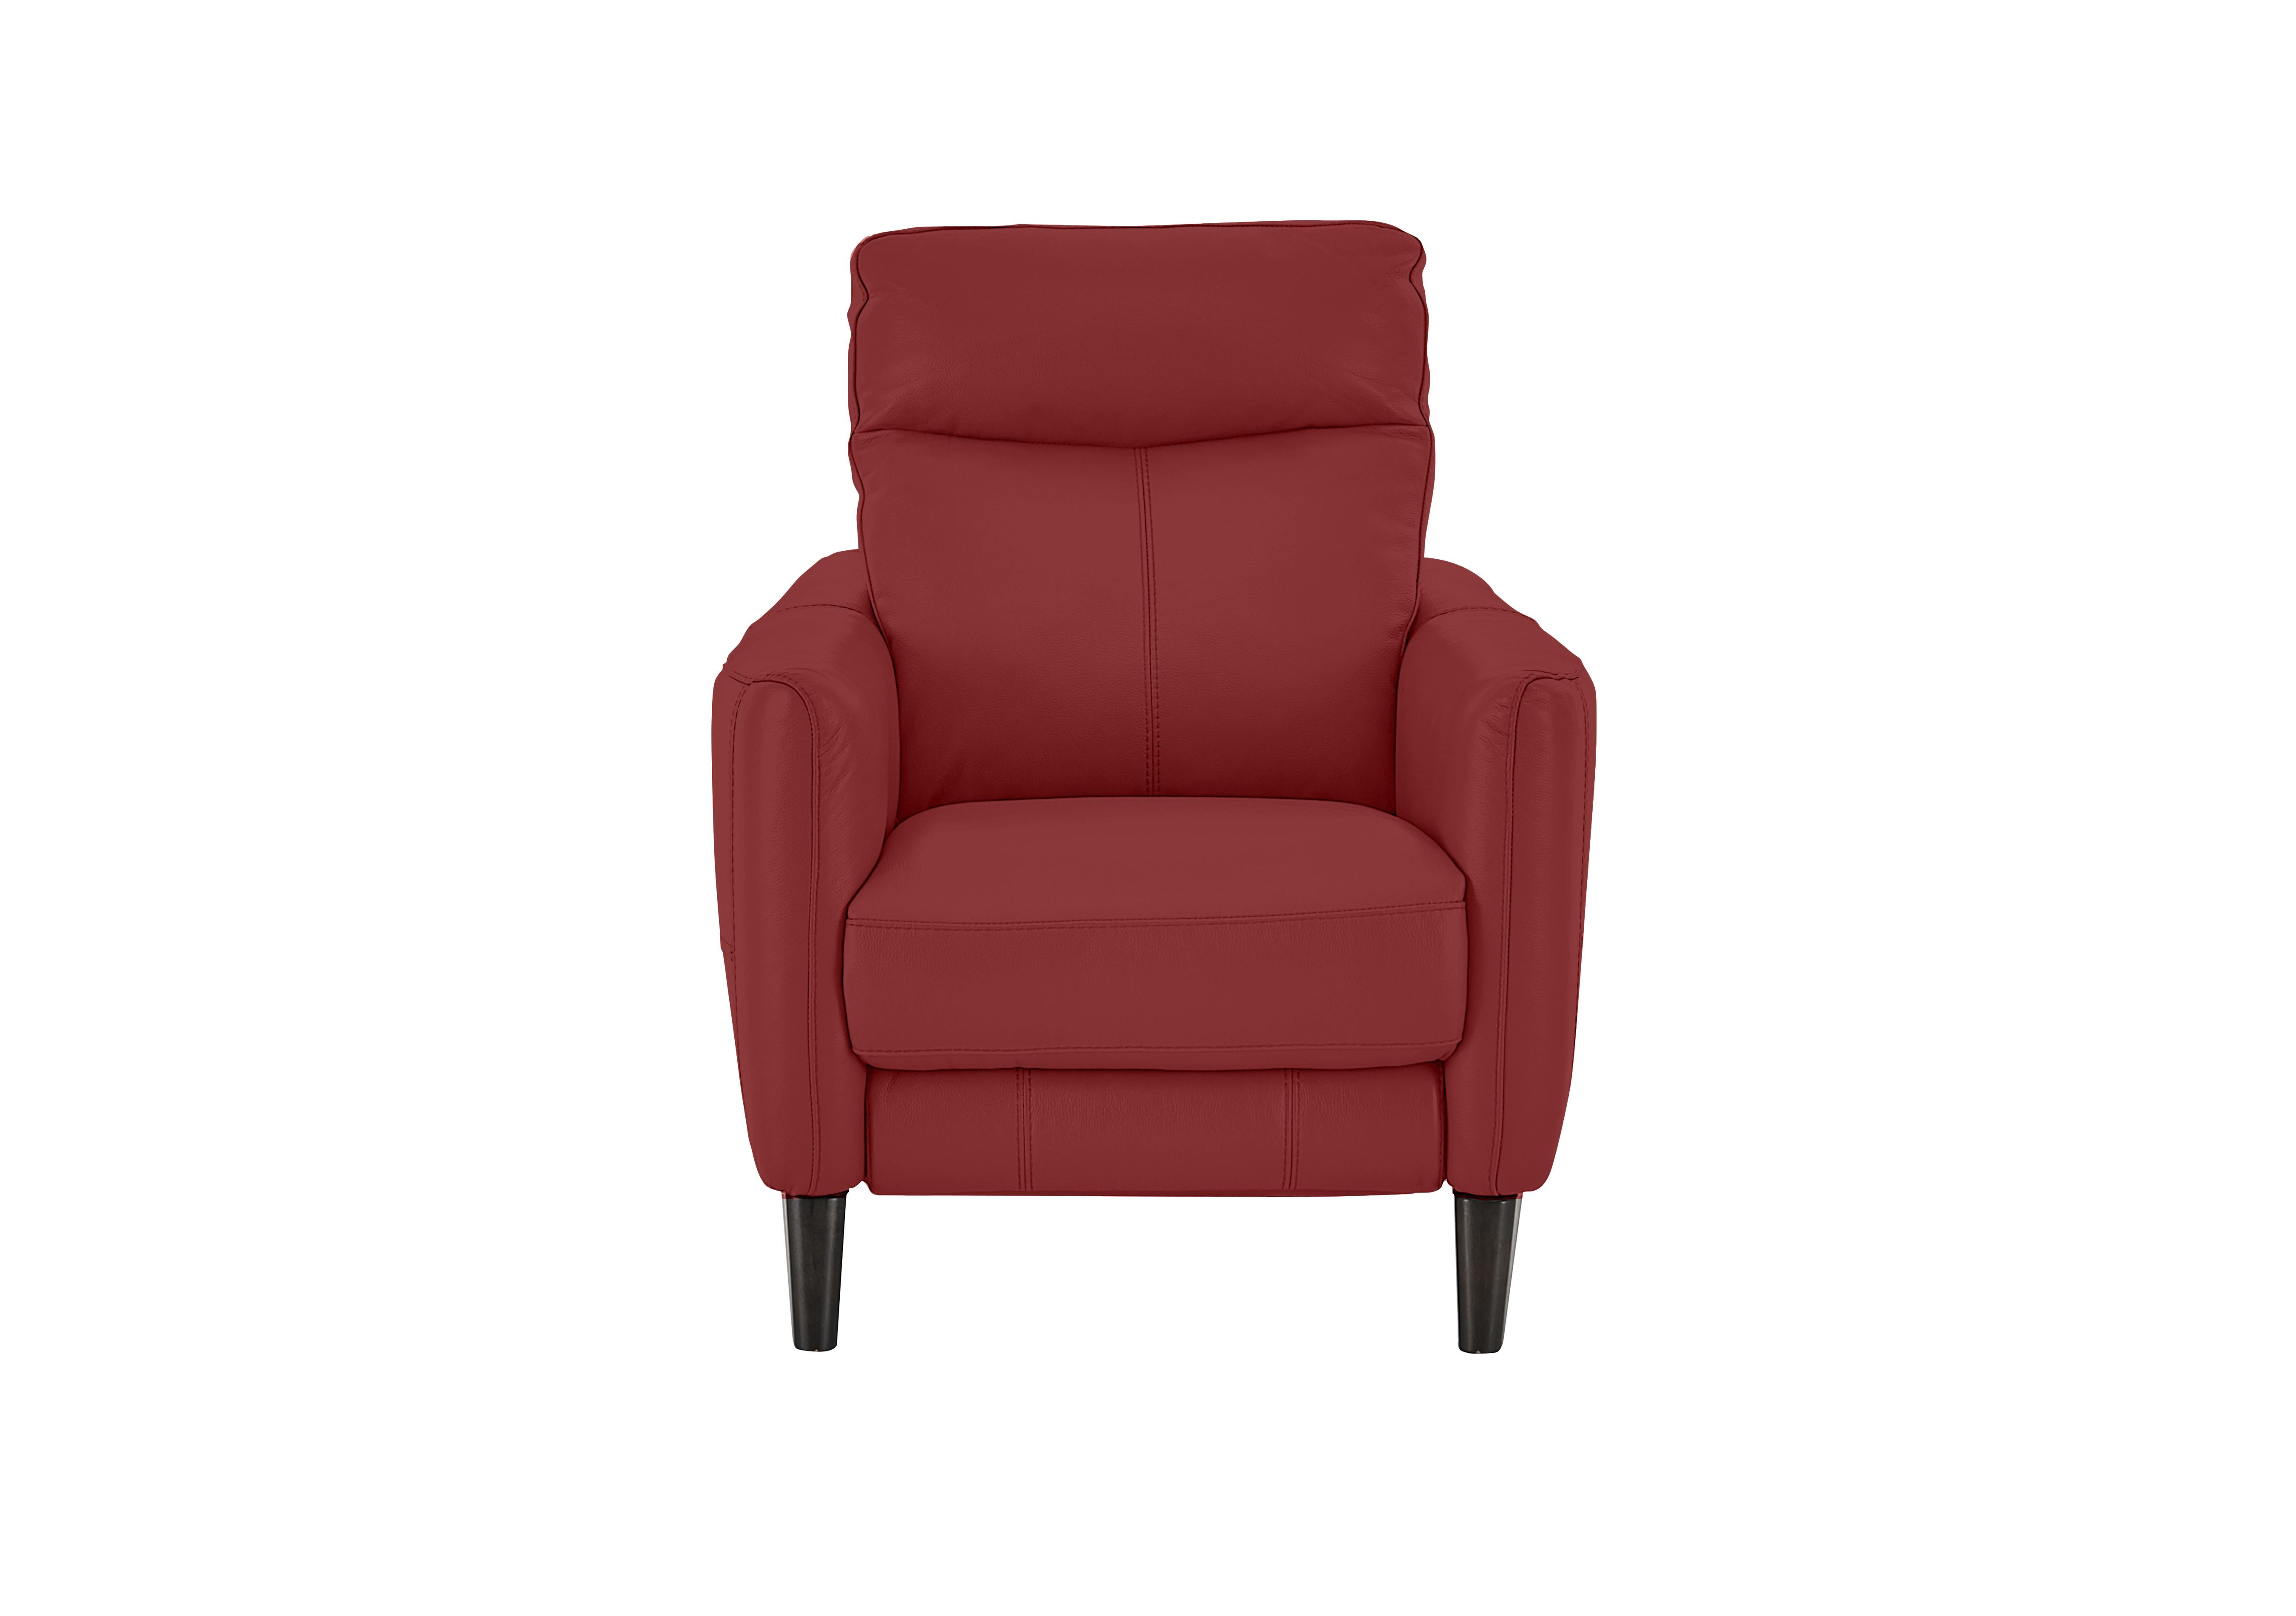 Compact Collection Petit Leather Recliner Armchair in Bv-0008 Pure Red on Furniture Village